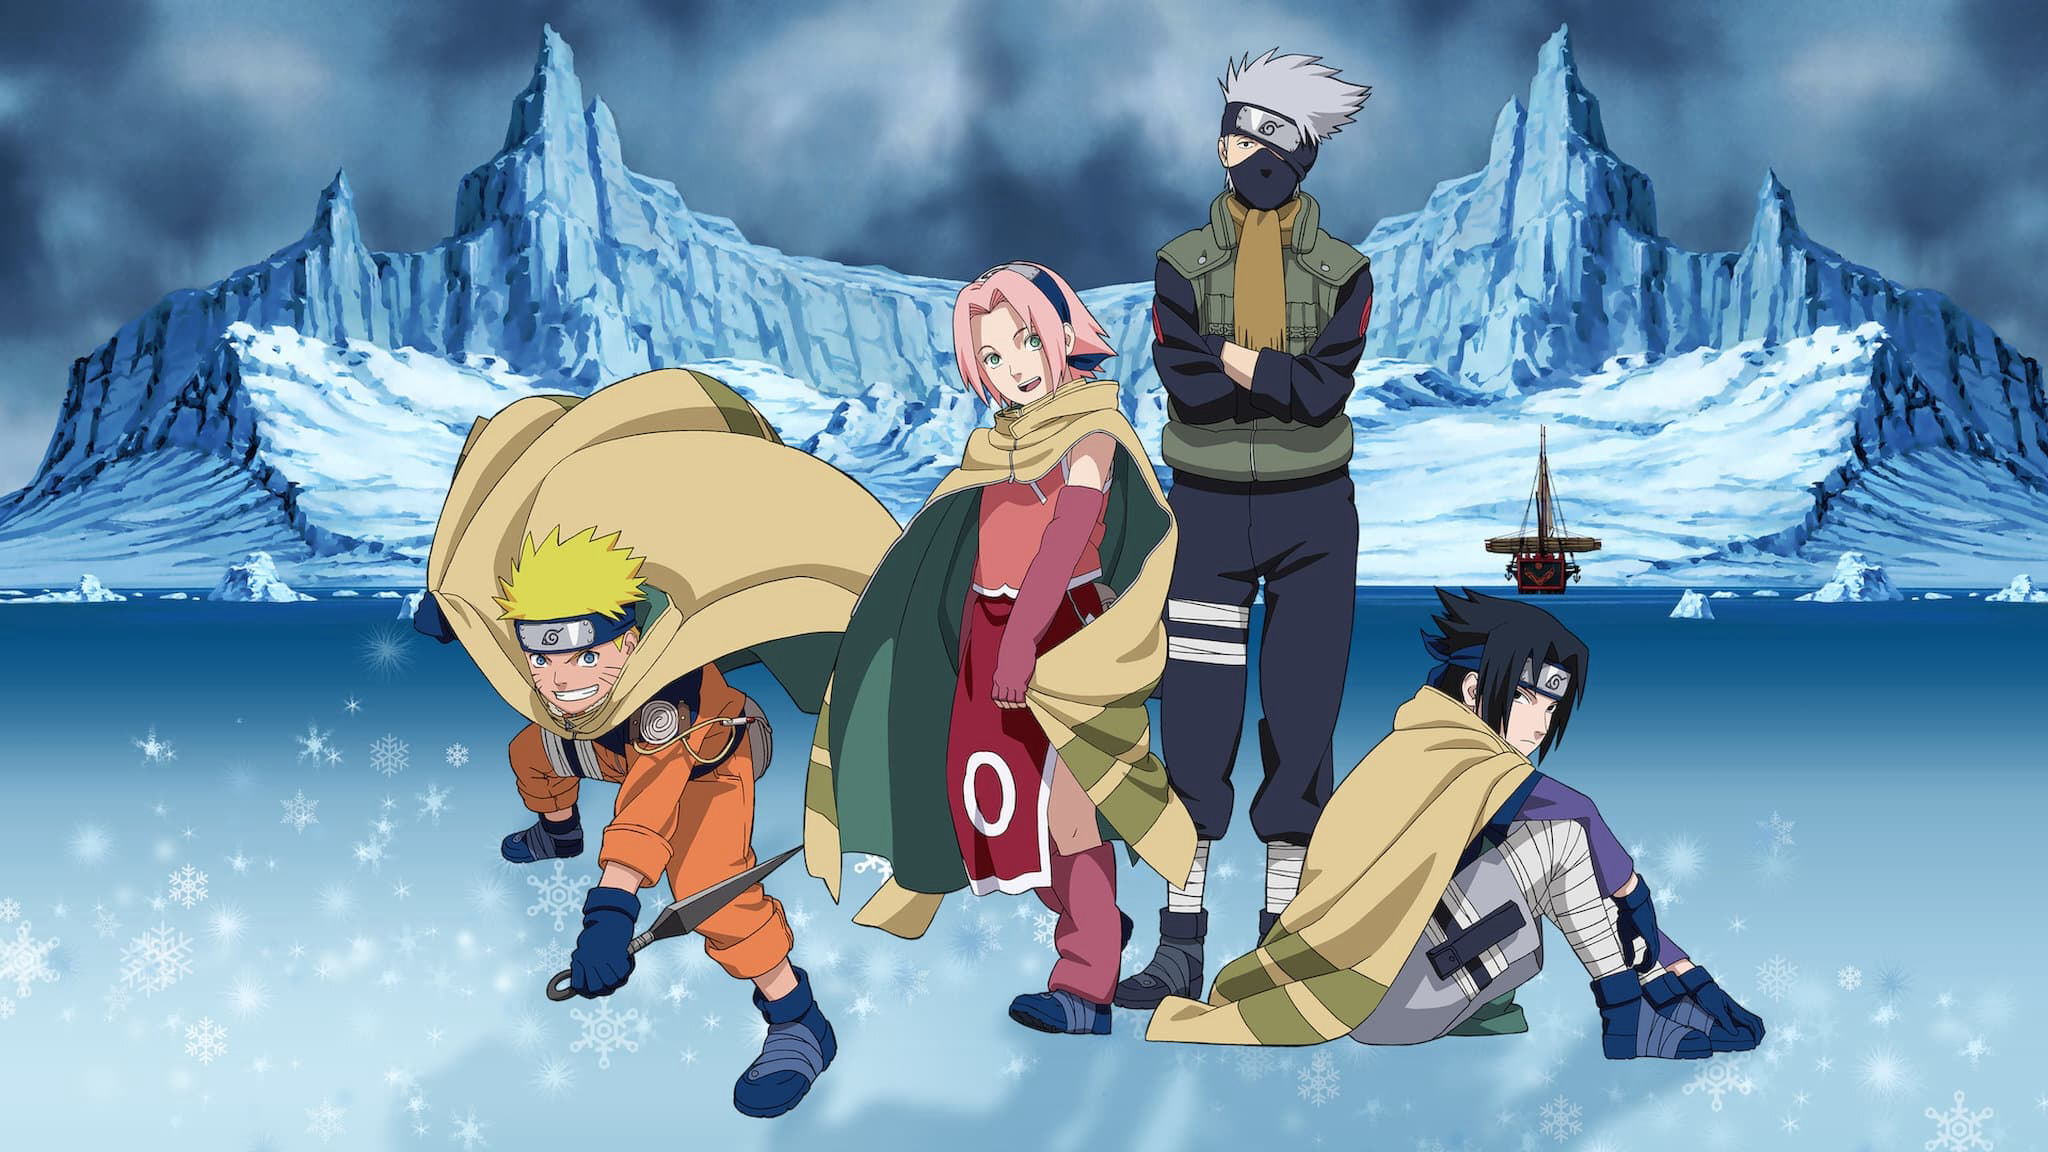 Banner Phim Naruto: Cuộc Chiến Ở Tuyết Quốc (Naruto the Movie: Ninja Clash in the Land of Snow)